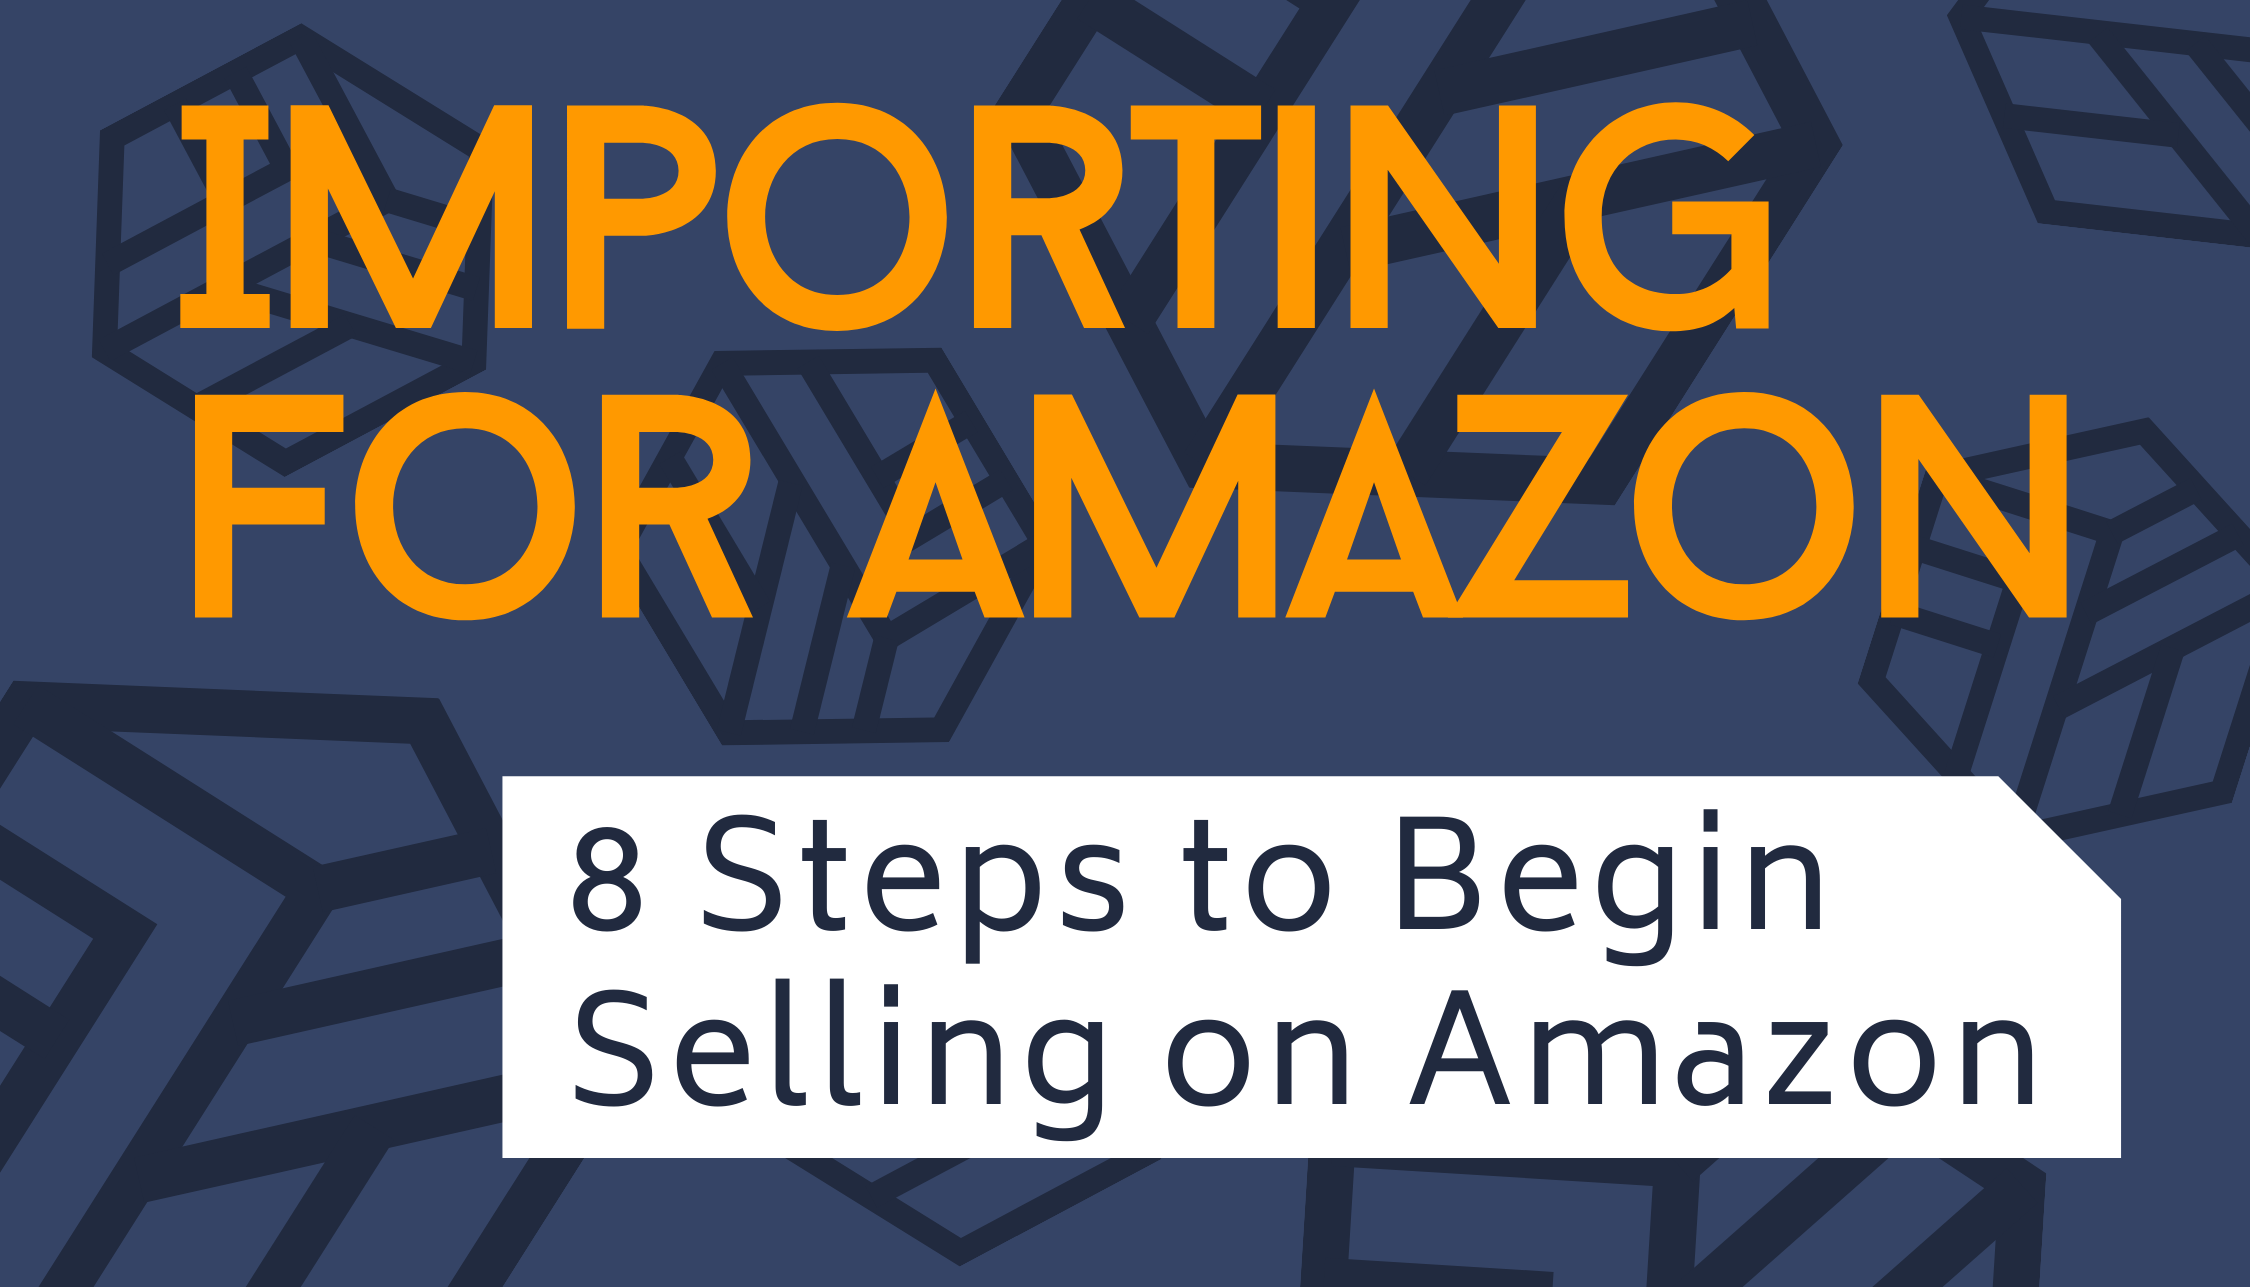 Importing For Amazon: 8 Steps to Begin Selling on Amazon